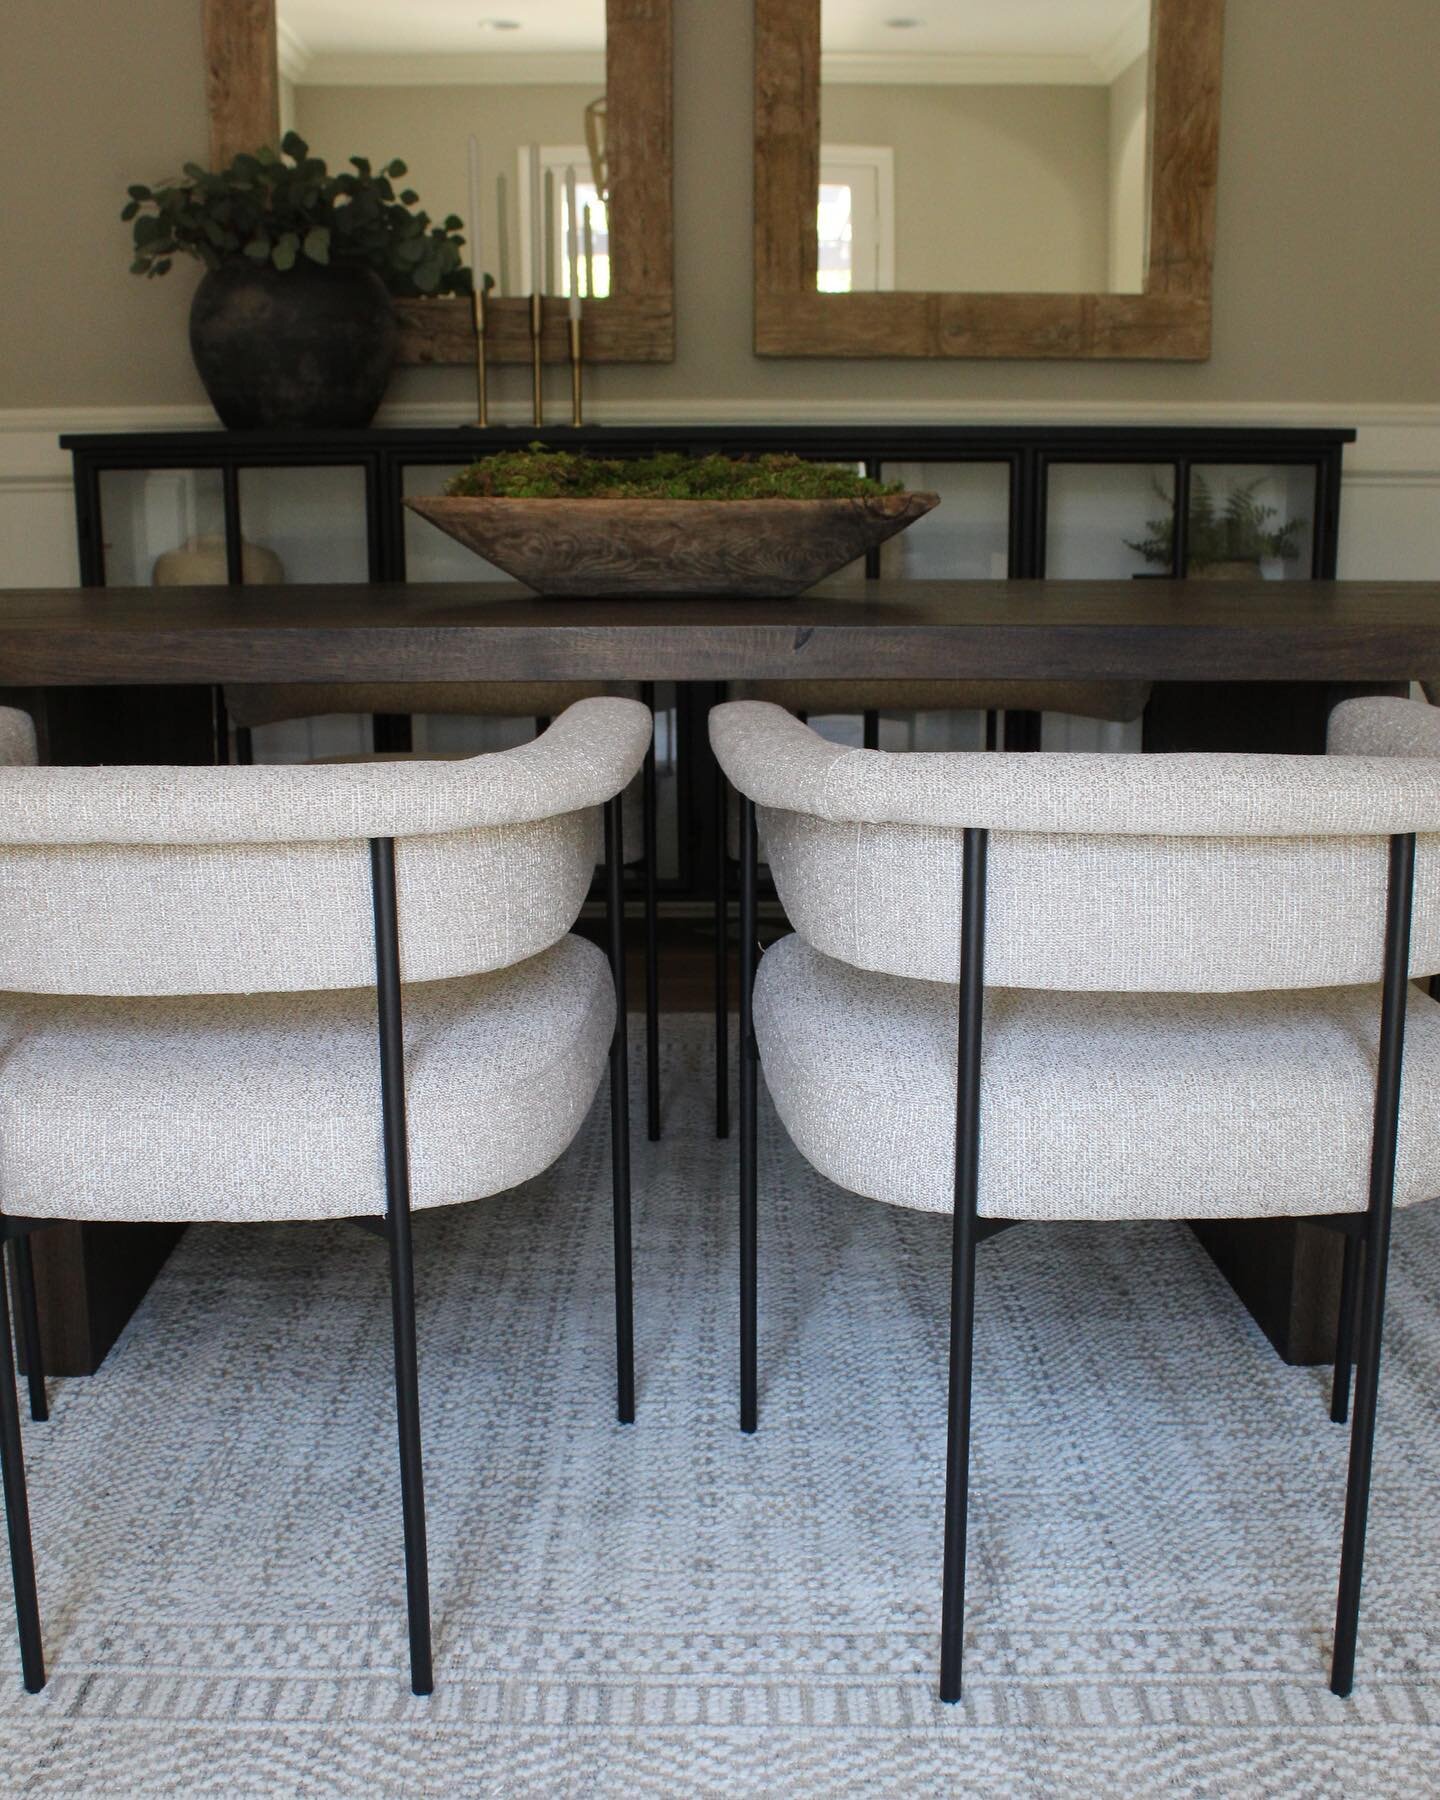 Warm aesthetics and clean lines in our #skdmckelvey dining room.
#skd #shannonkatedesigns